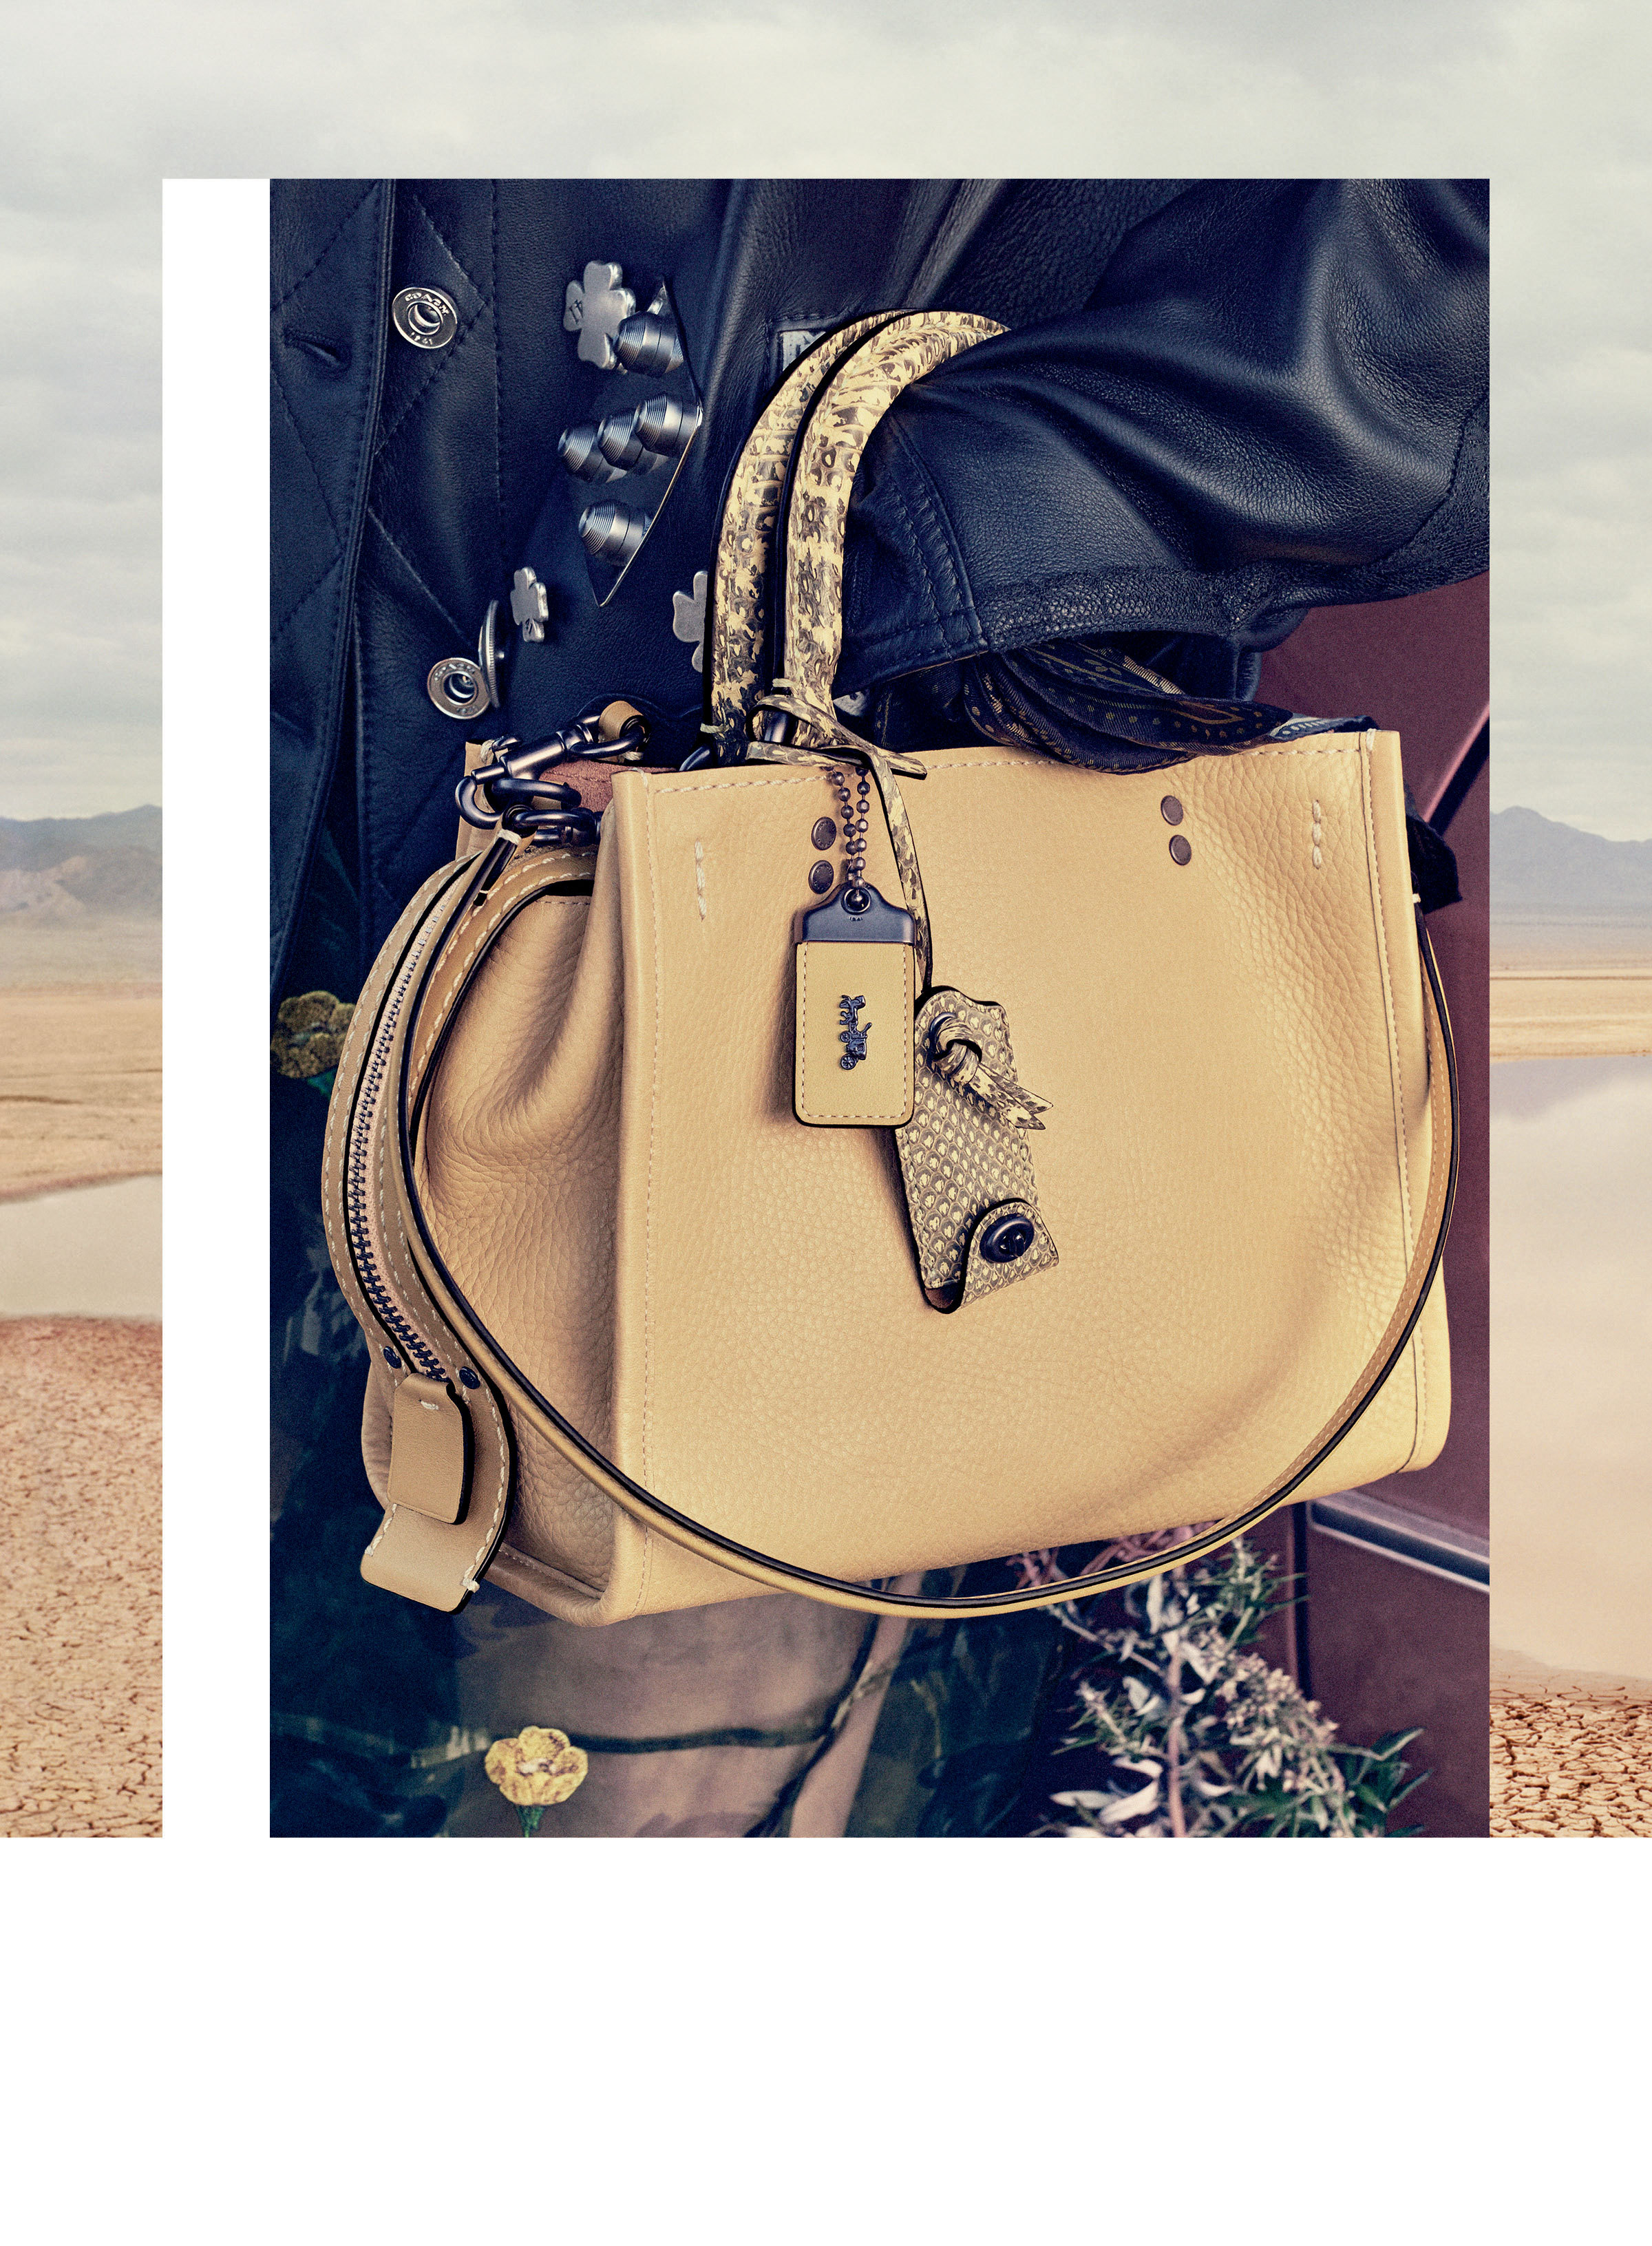 Coach, Inc. Reports Fiscal 2017 Fourth Quarter and Full Year